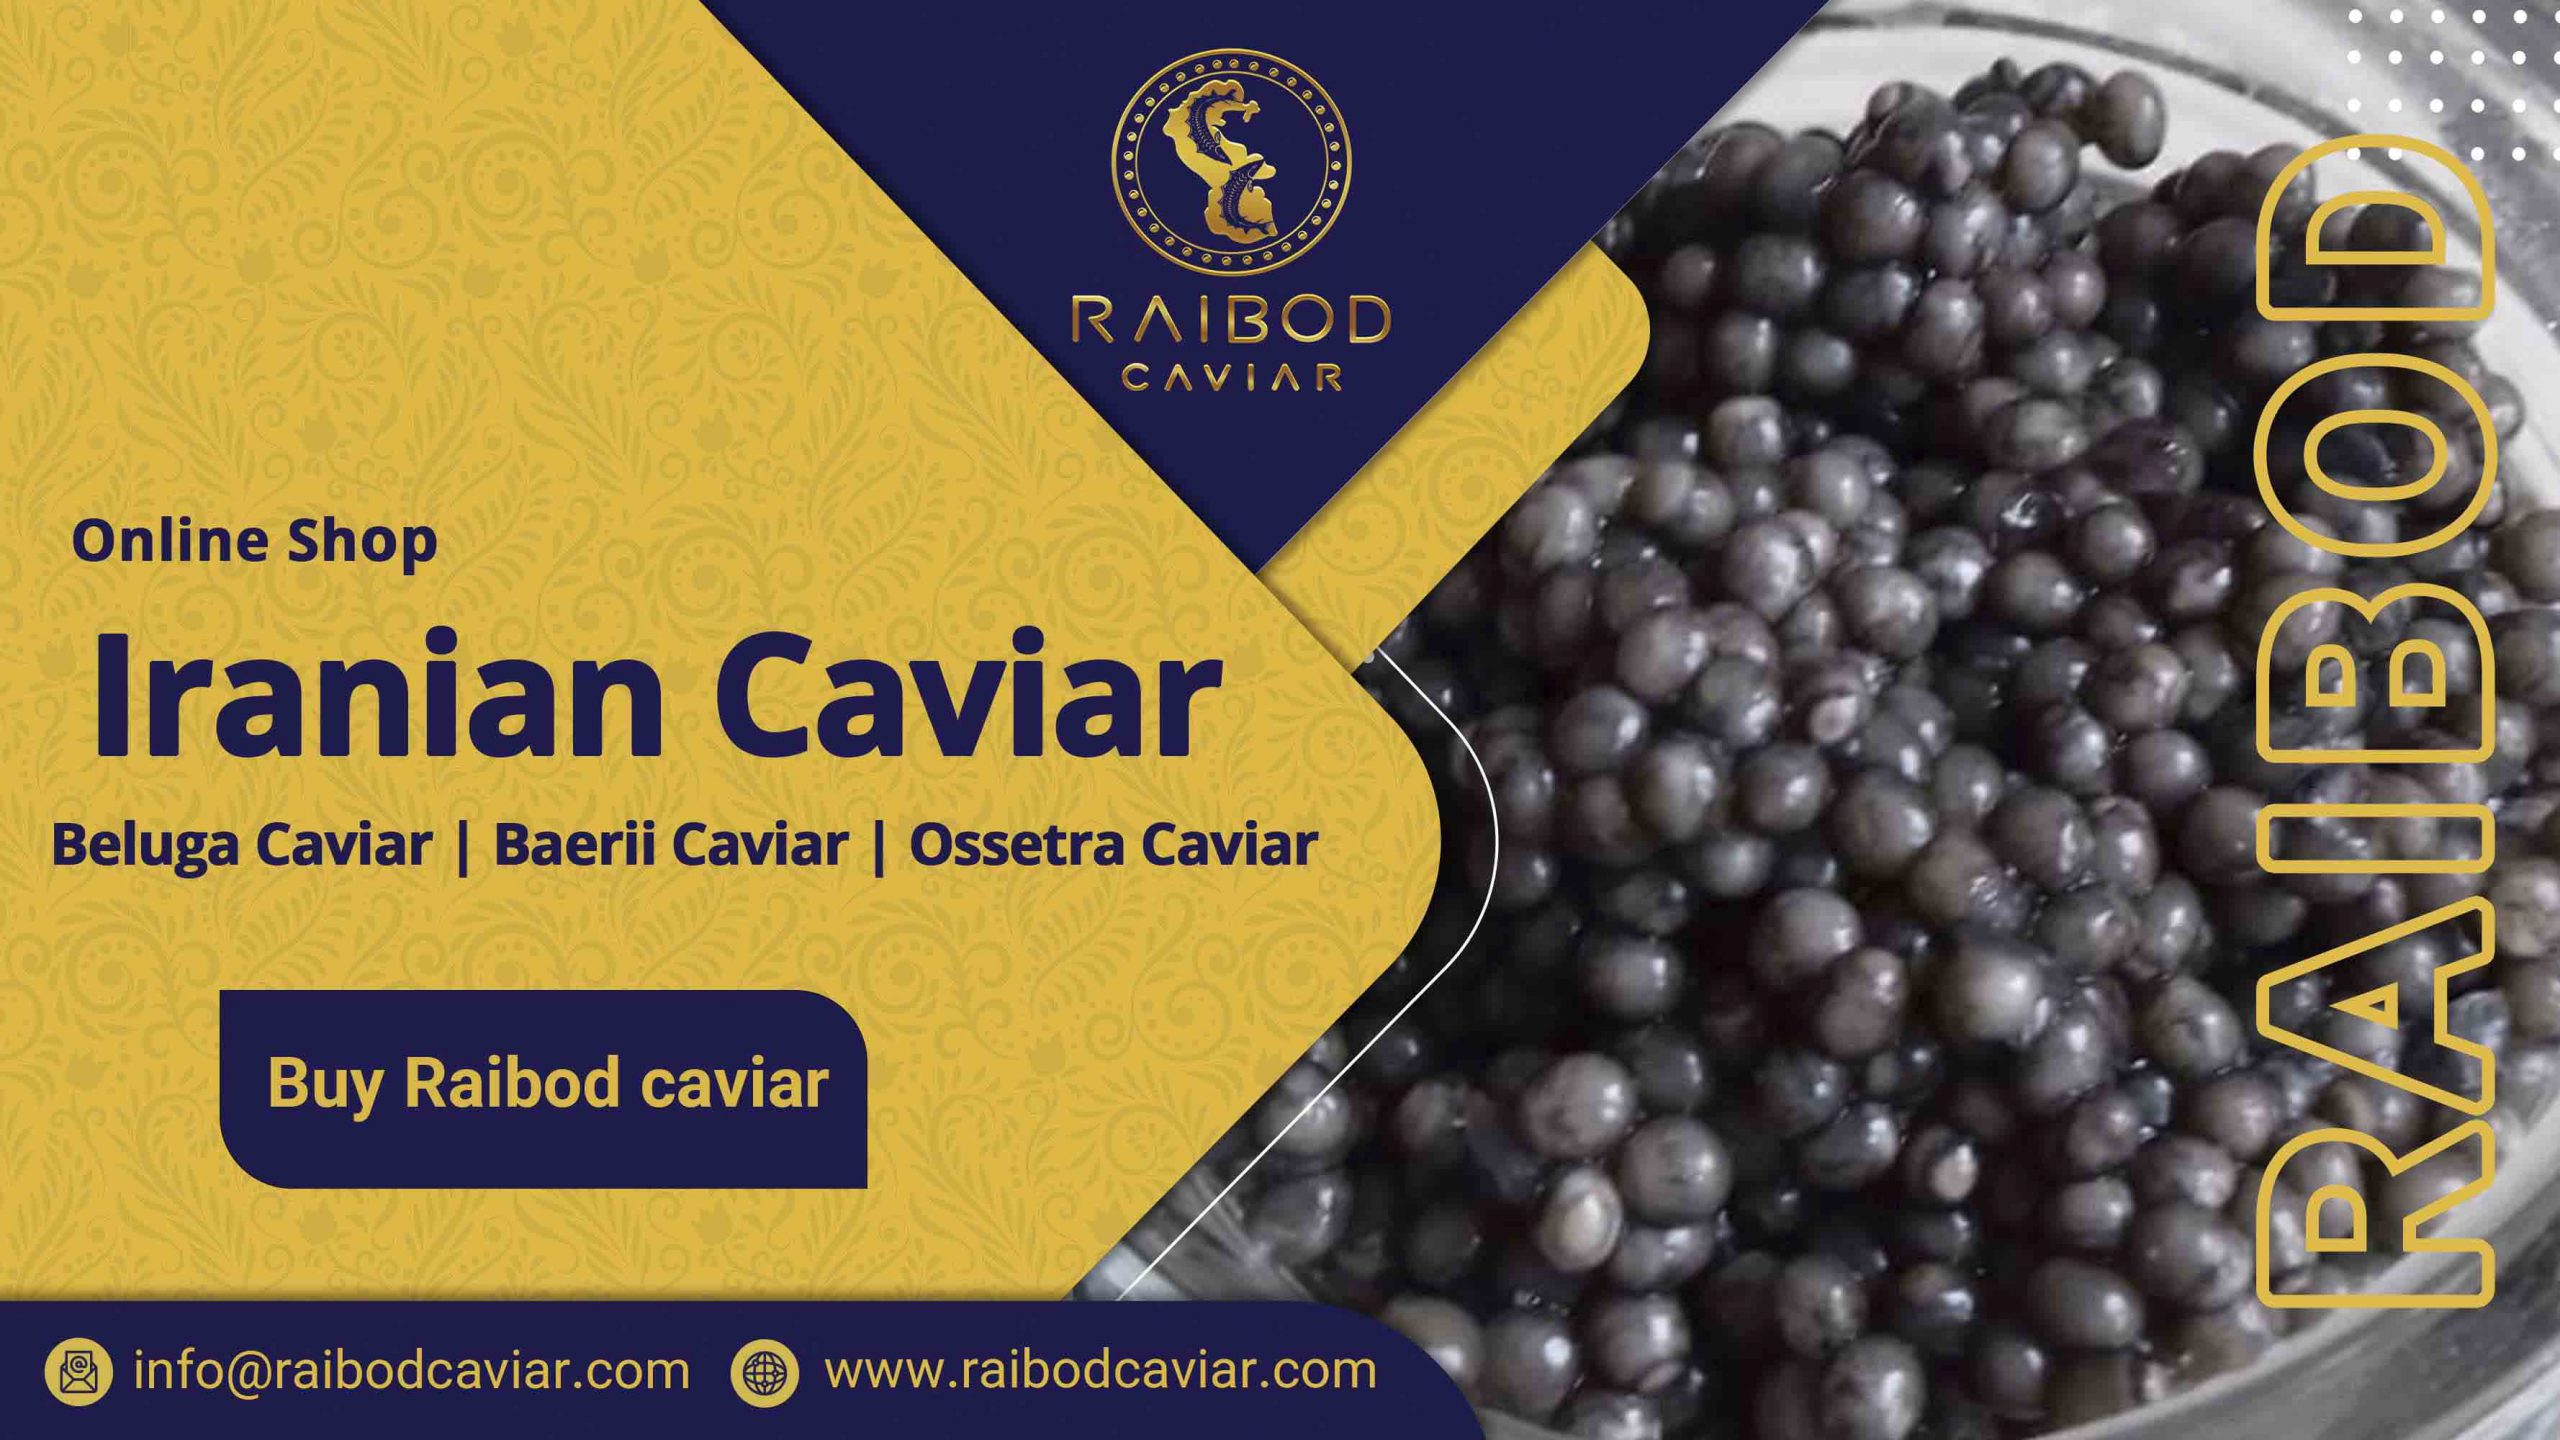 Sale of Beluga caviar has great impact on the country's economy today. It is one of the rarest and best caviar in the world